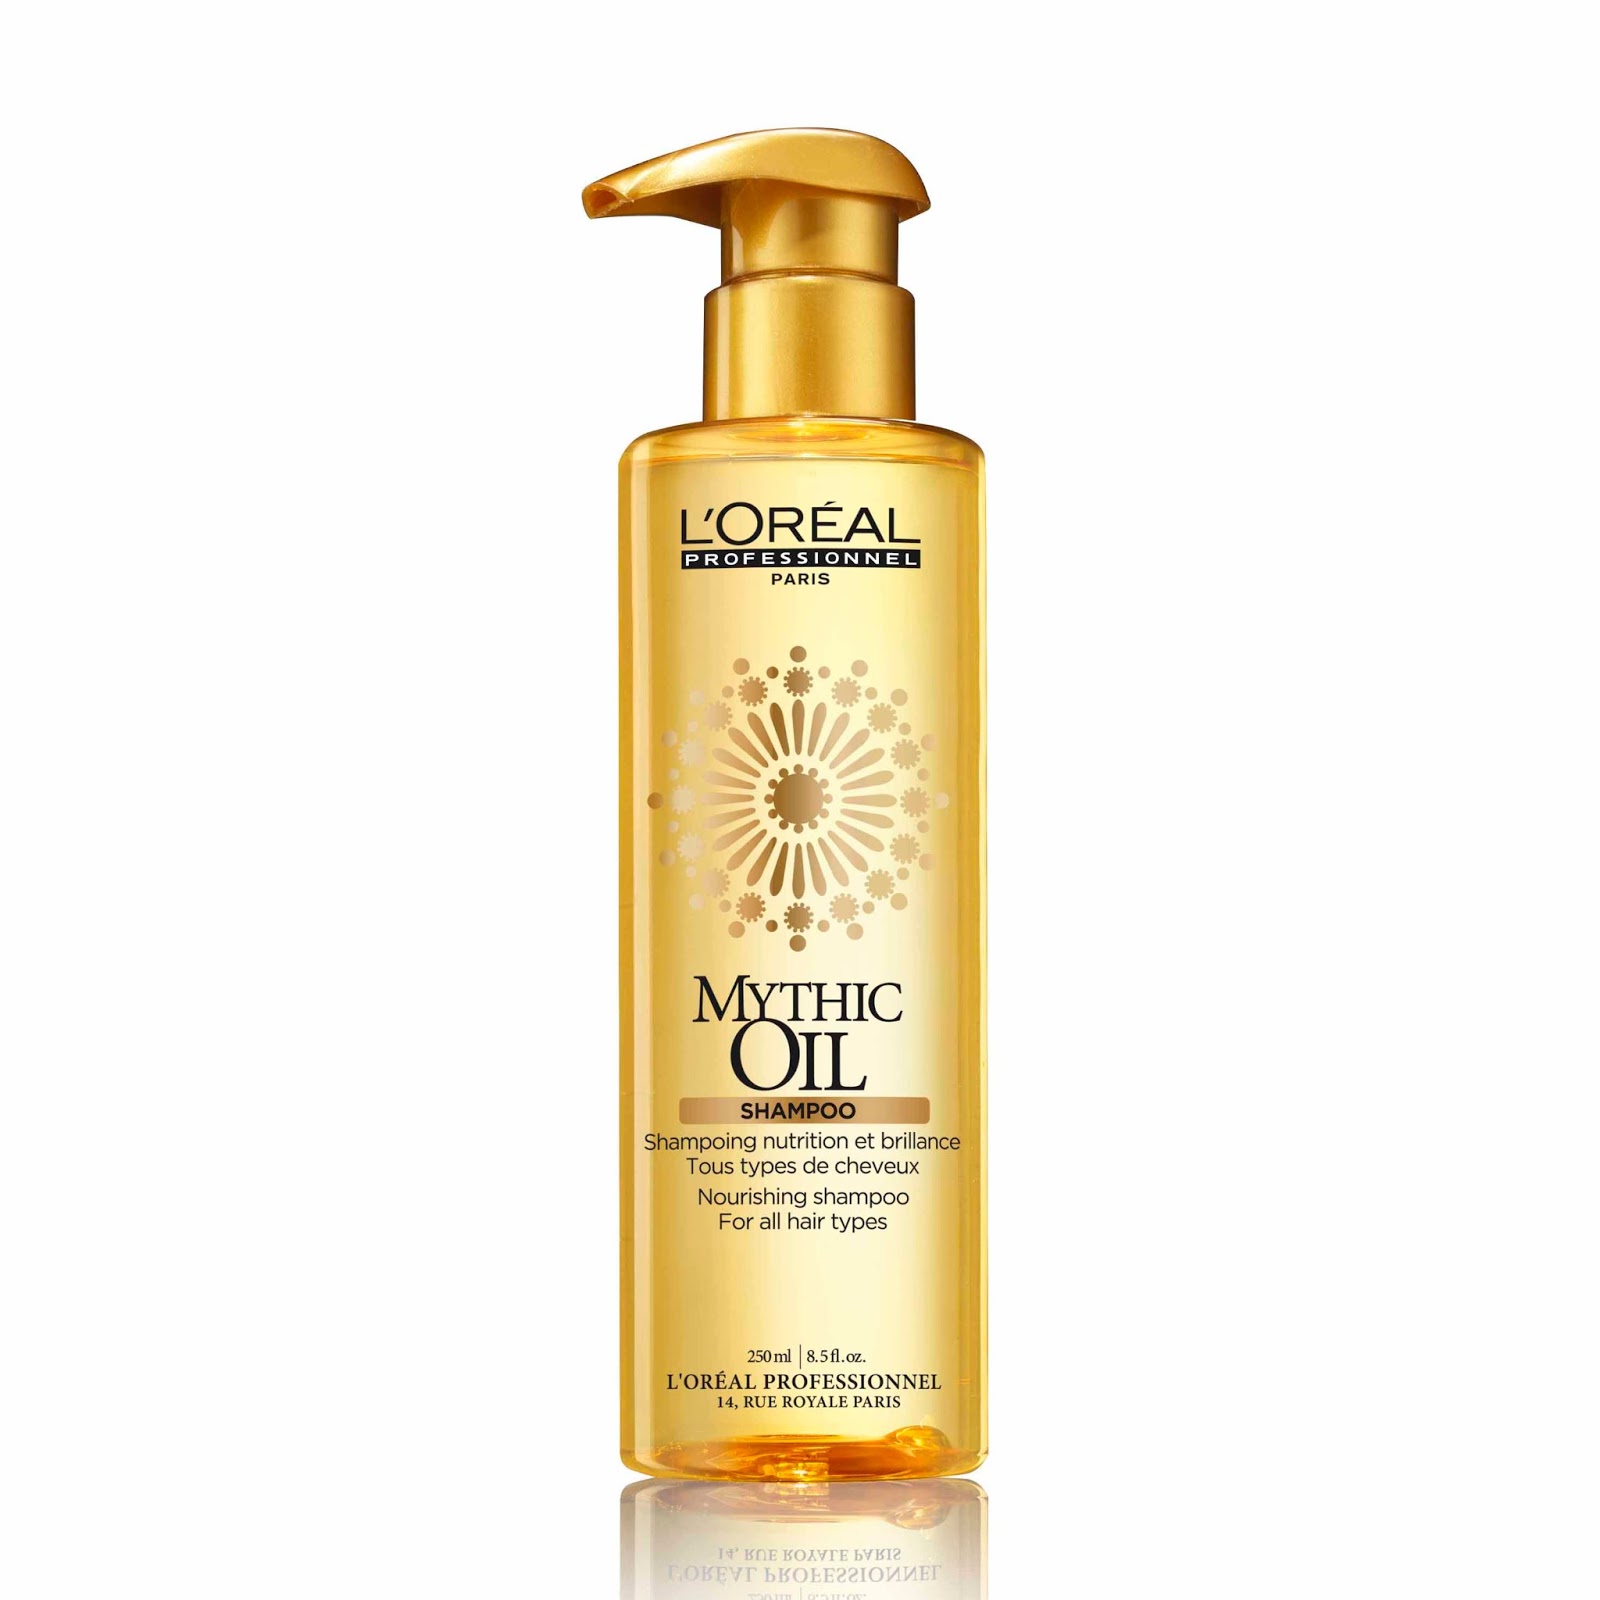 Tammy s Diary Review Mythic Oil Shampooing De L Or al Professionnel